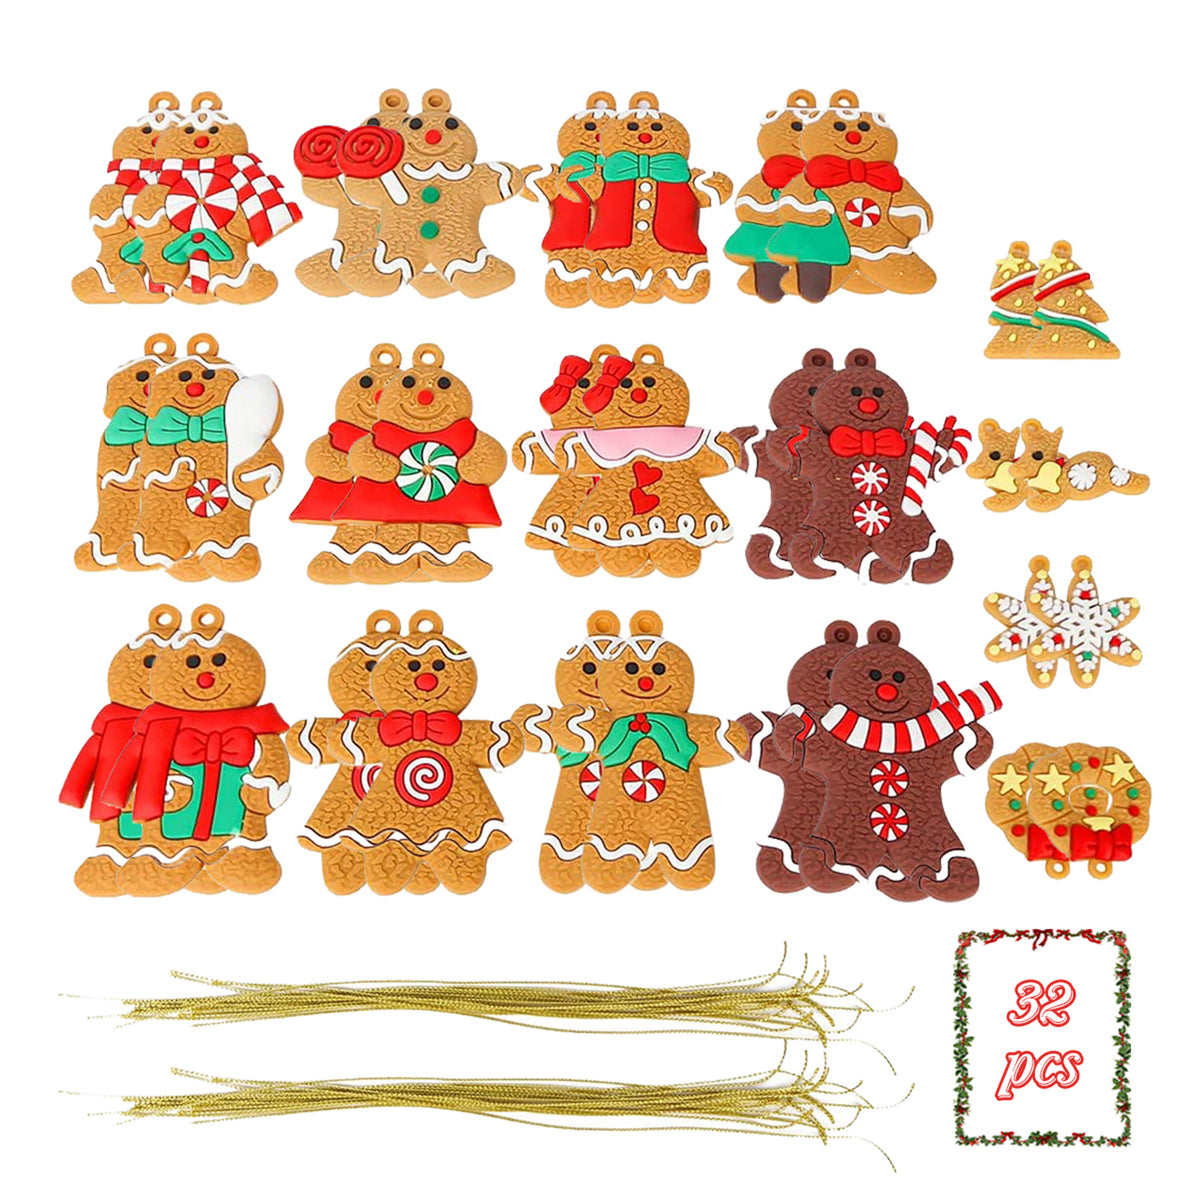 AMOR PRESENT Gingerbread Man Ornaments Christmas Figurine for Christmas Tree Hanging Decorations for Kids Adults